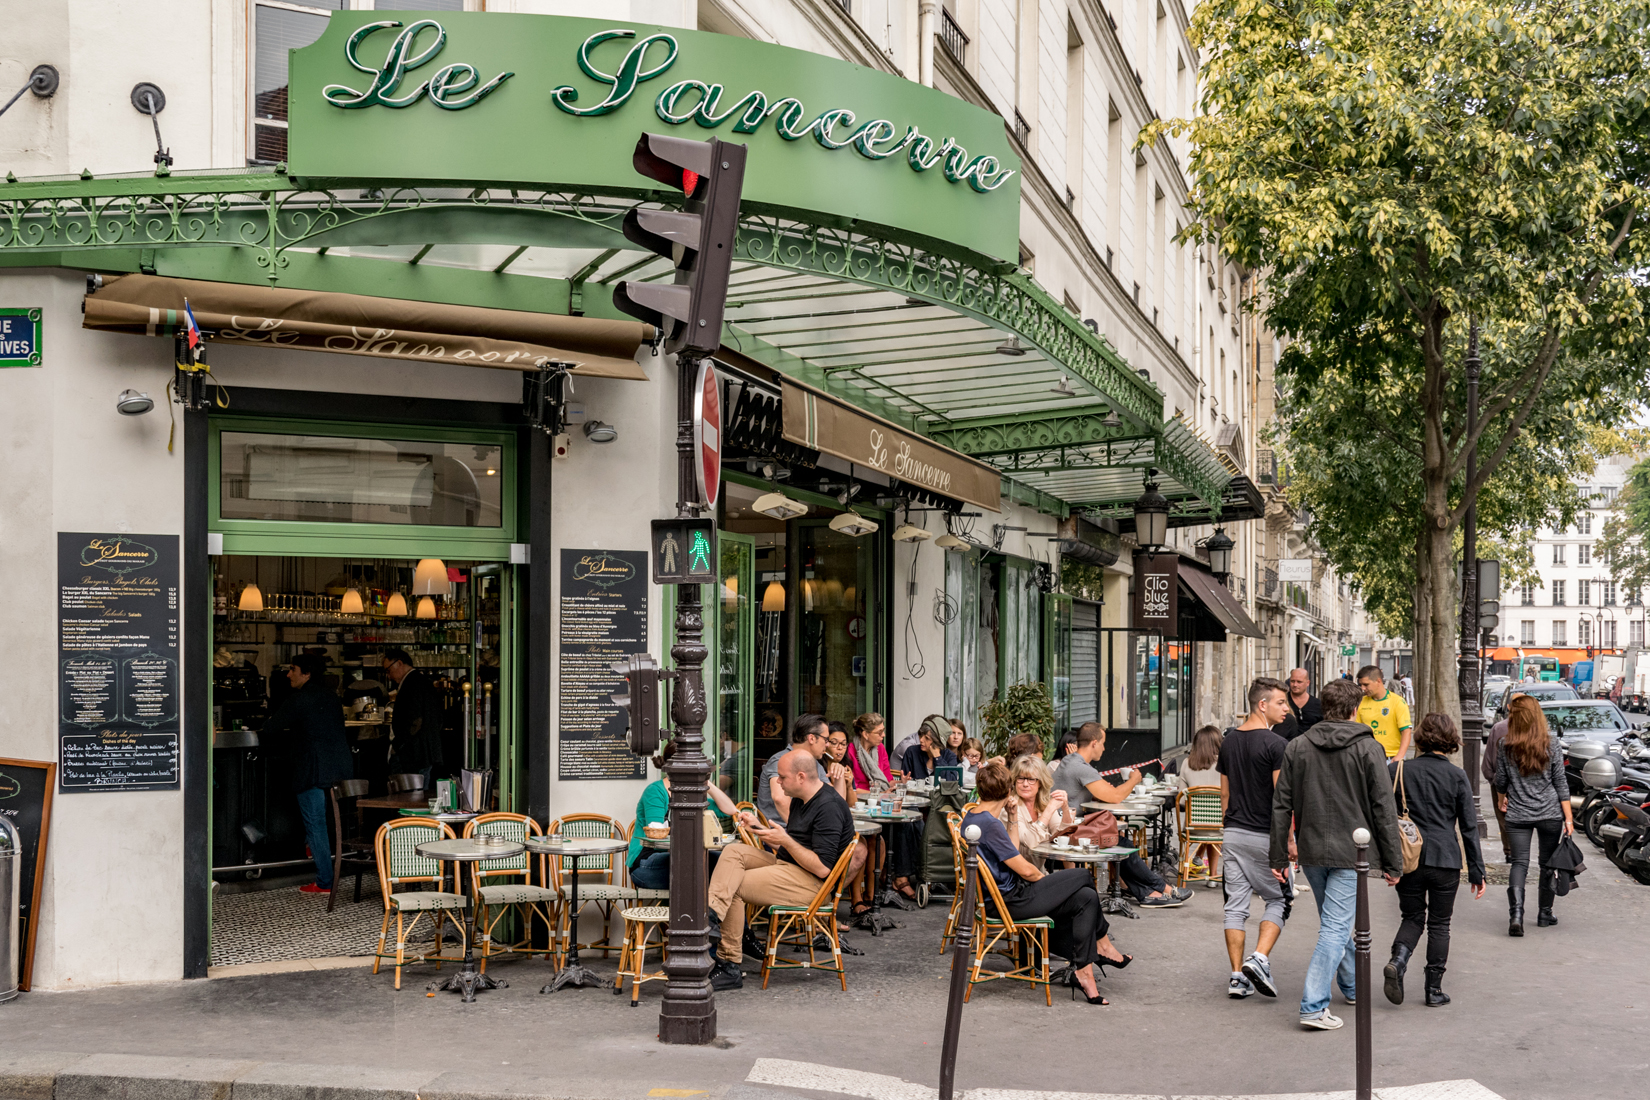 Café culture is at the heart of Parisienne life